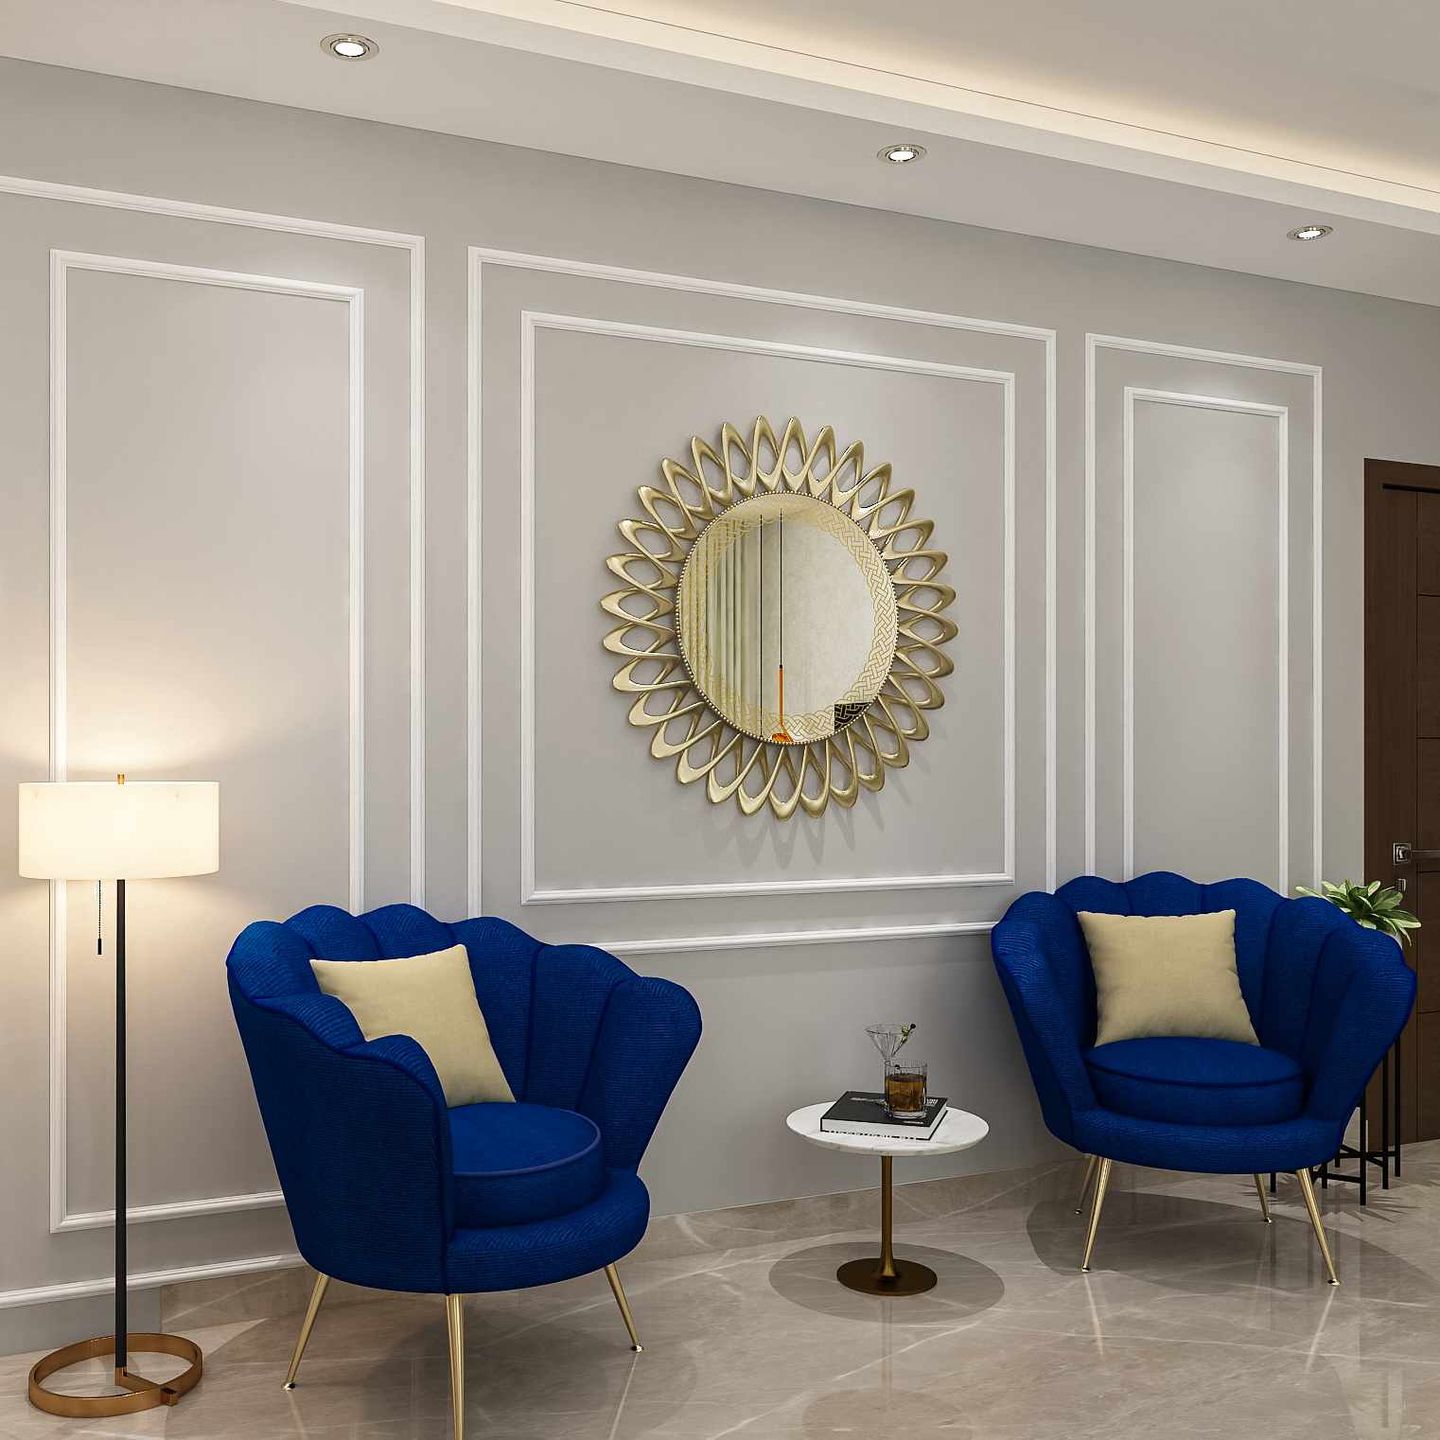 Premium Foyer Design With Blue Upholstered Chairs - Livspace